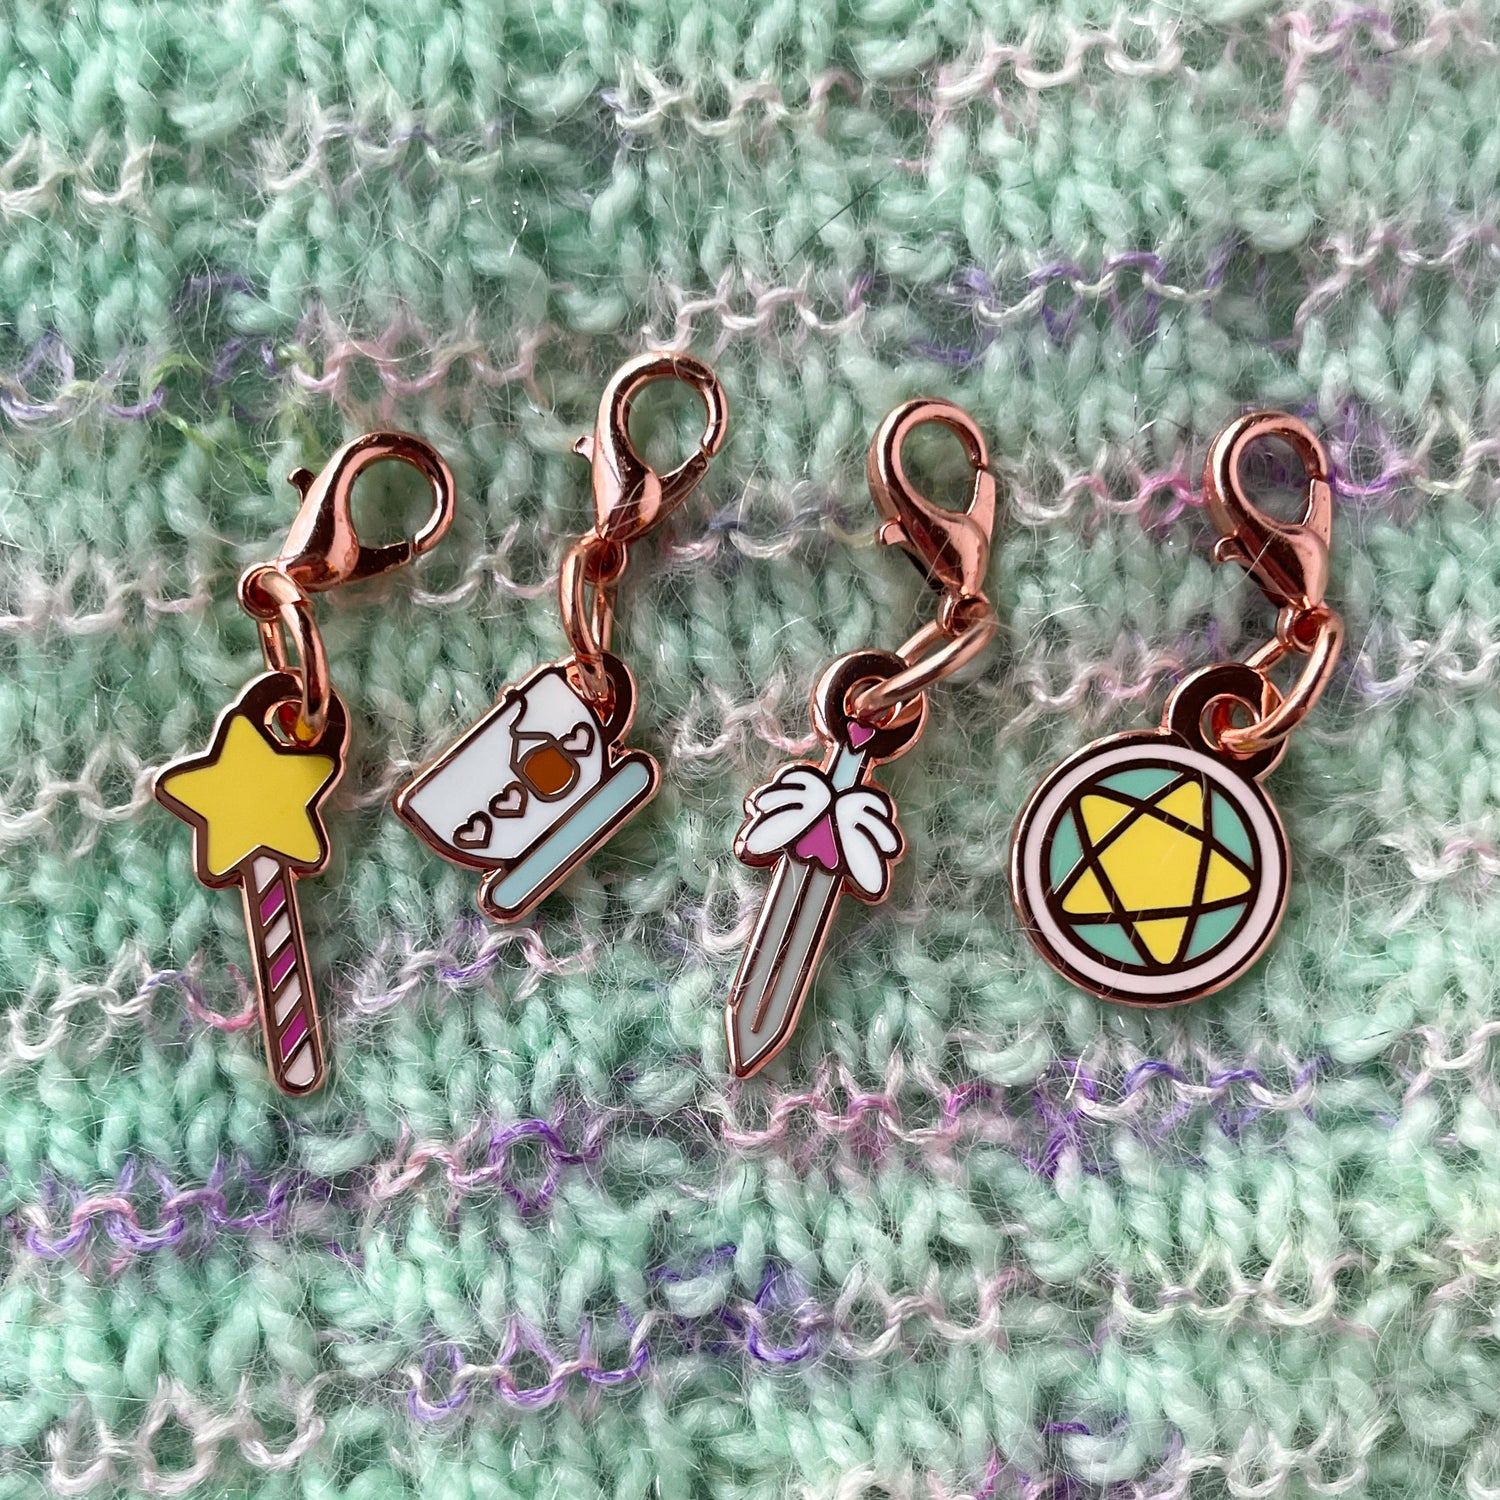 A collection of charms on a hand knit  background. The charms are shaped like a sword, a teacup, a wand, and a pentacle circle.